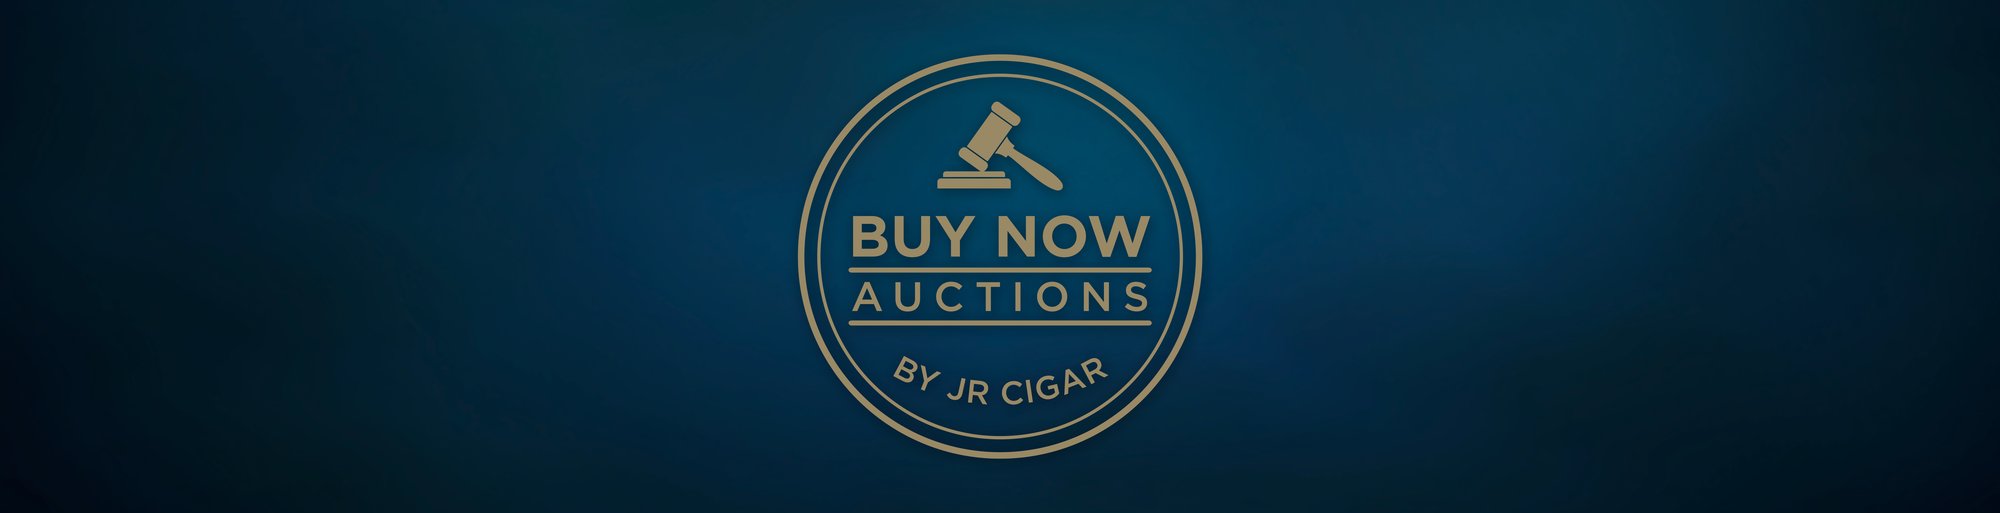 Buy now auctions banner with gavel